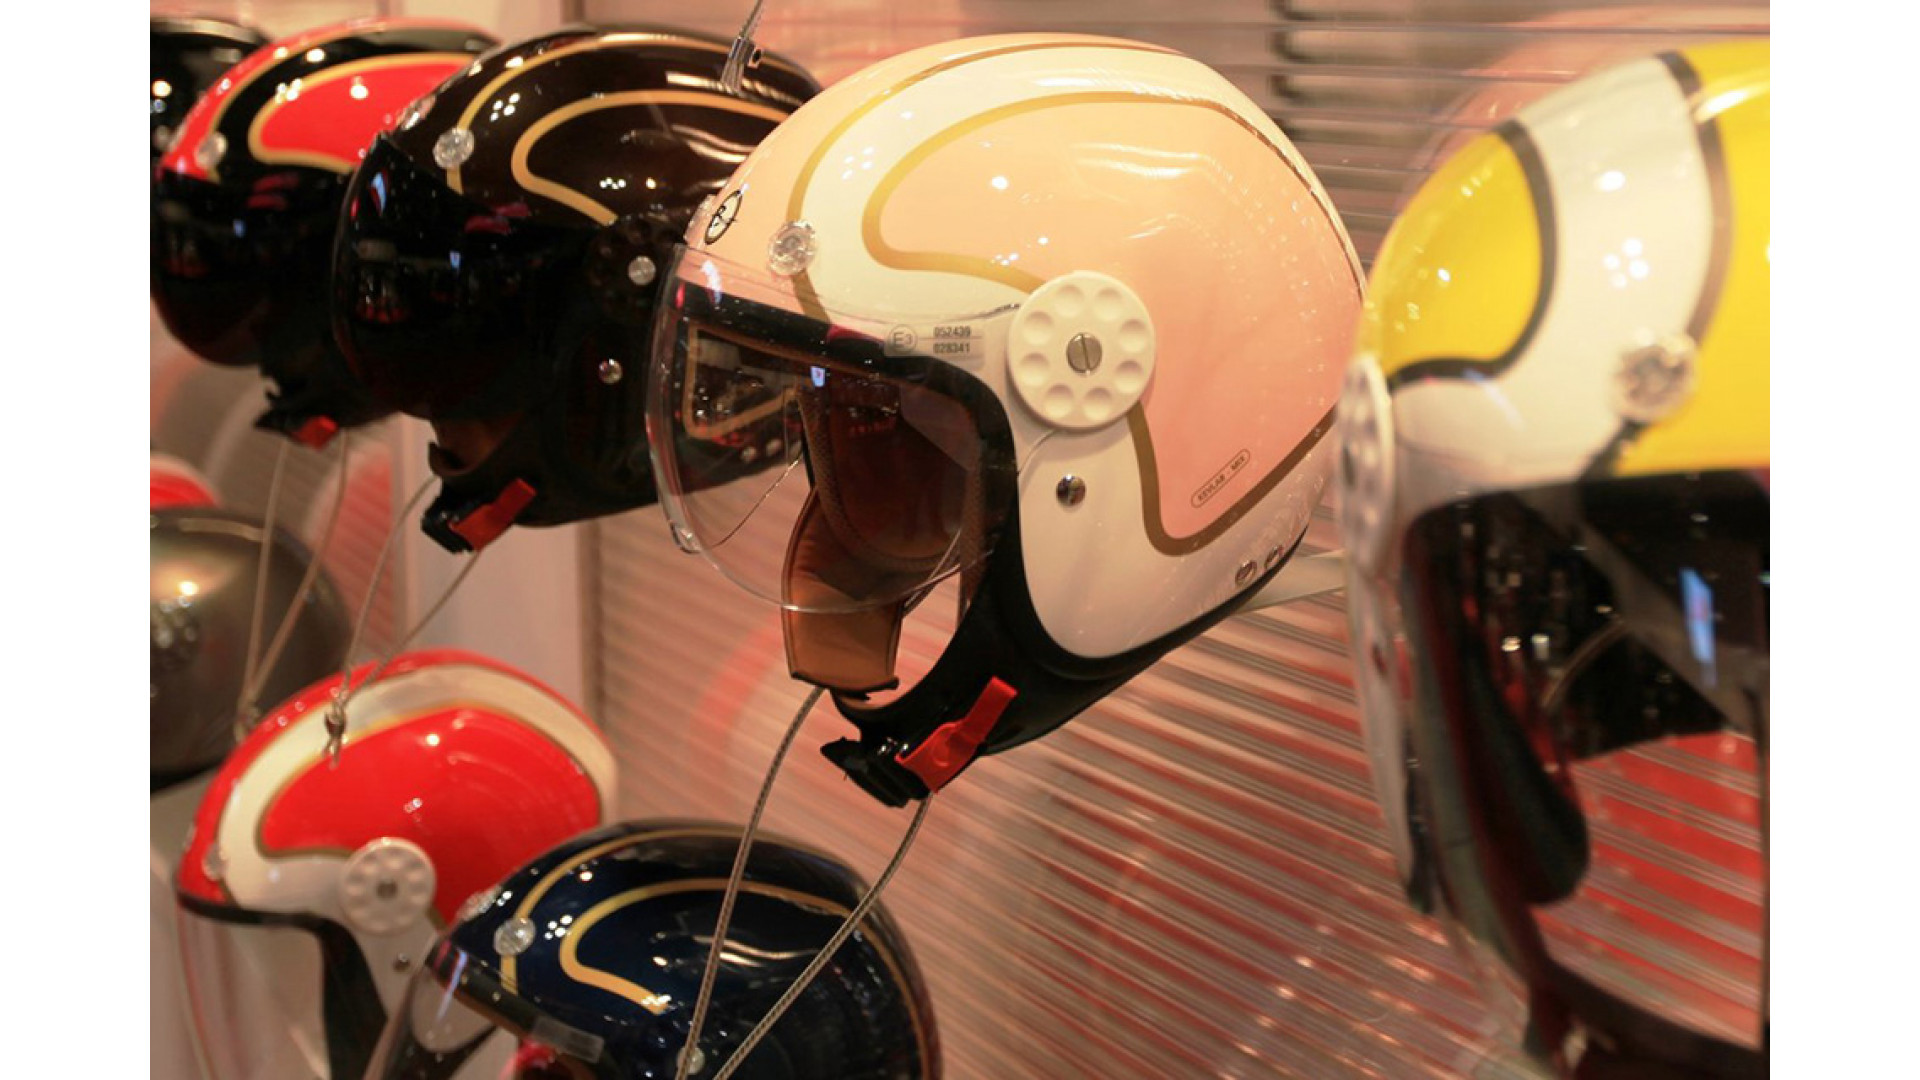 https://www.raceleathers.co.uk/image/cache/catalog/Blog%20Images/Is%20It%20OK%20to%20Use%20Open%20Face%20Motorcycle%20Helmets-1920x1080.jpg